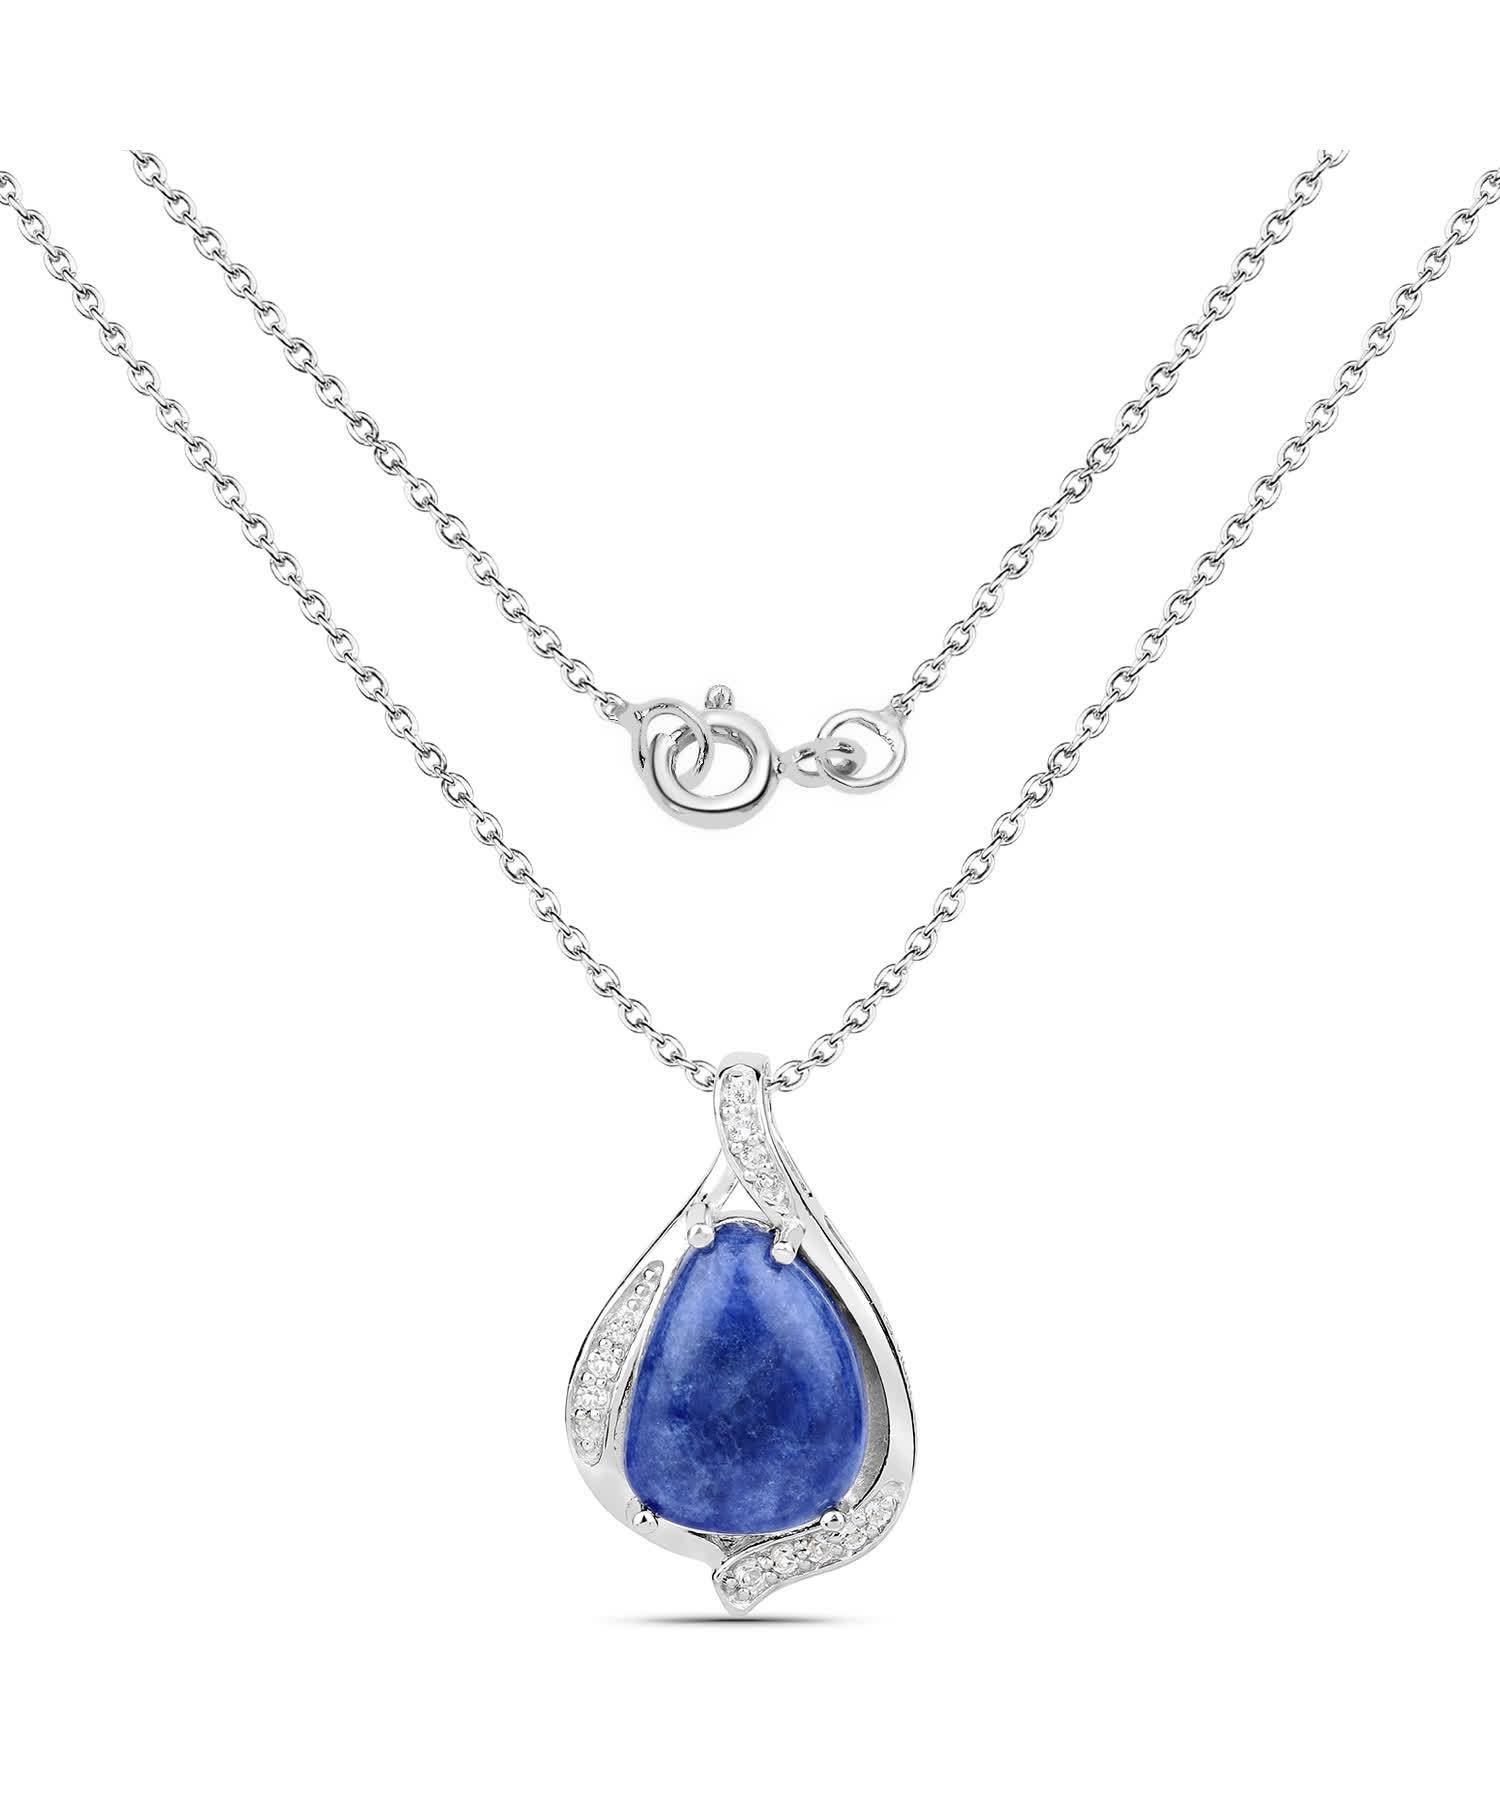 2.41ctw Natural Aventurine and Topaz Rhodium Plated 925 Sterling Silver Drop Pendant With Chain View 2